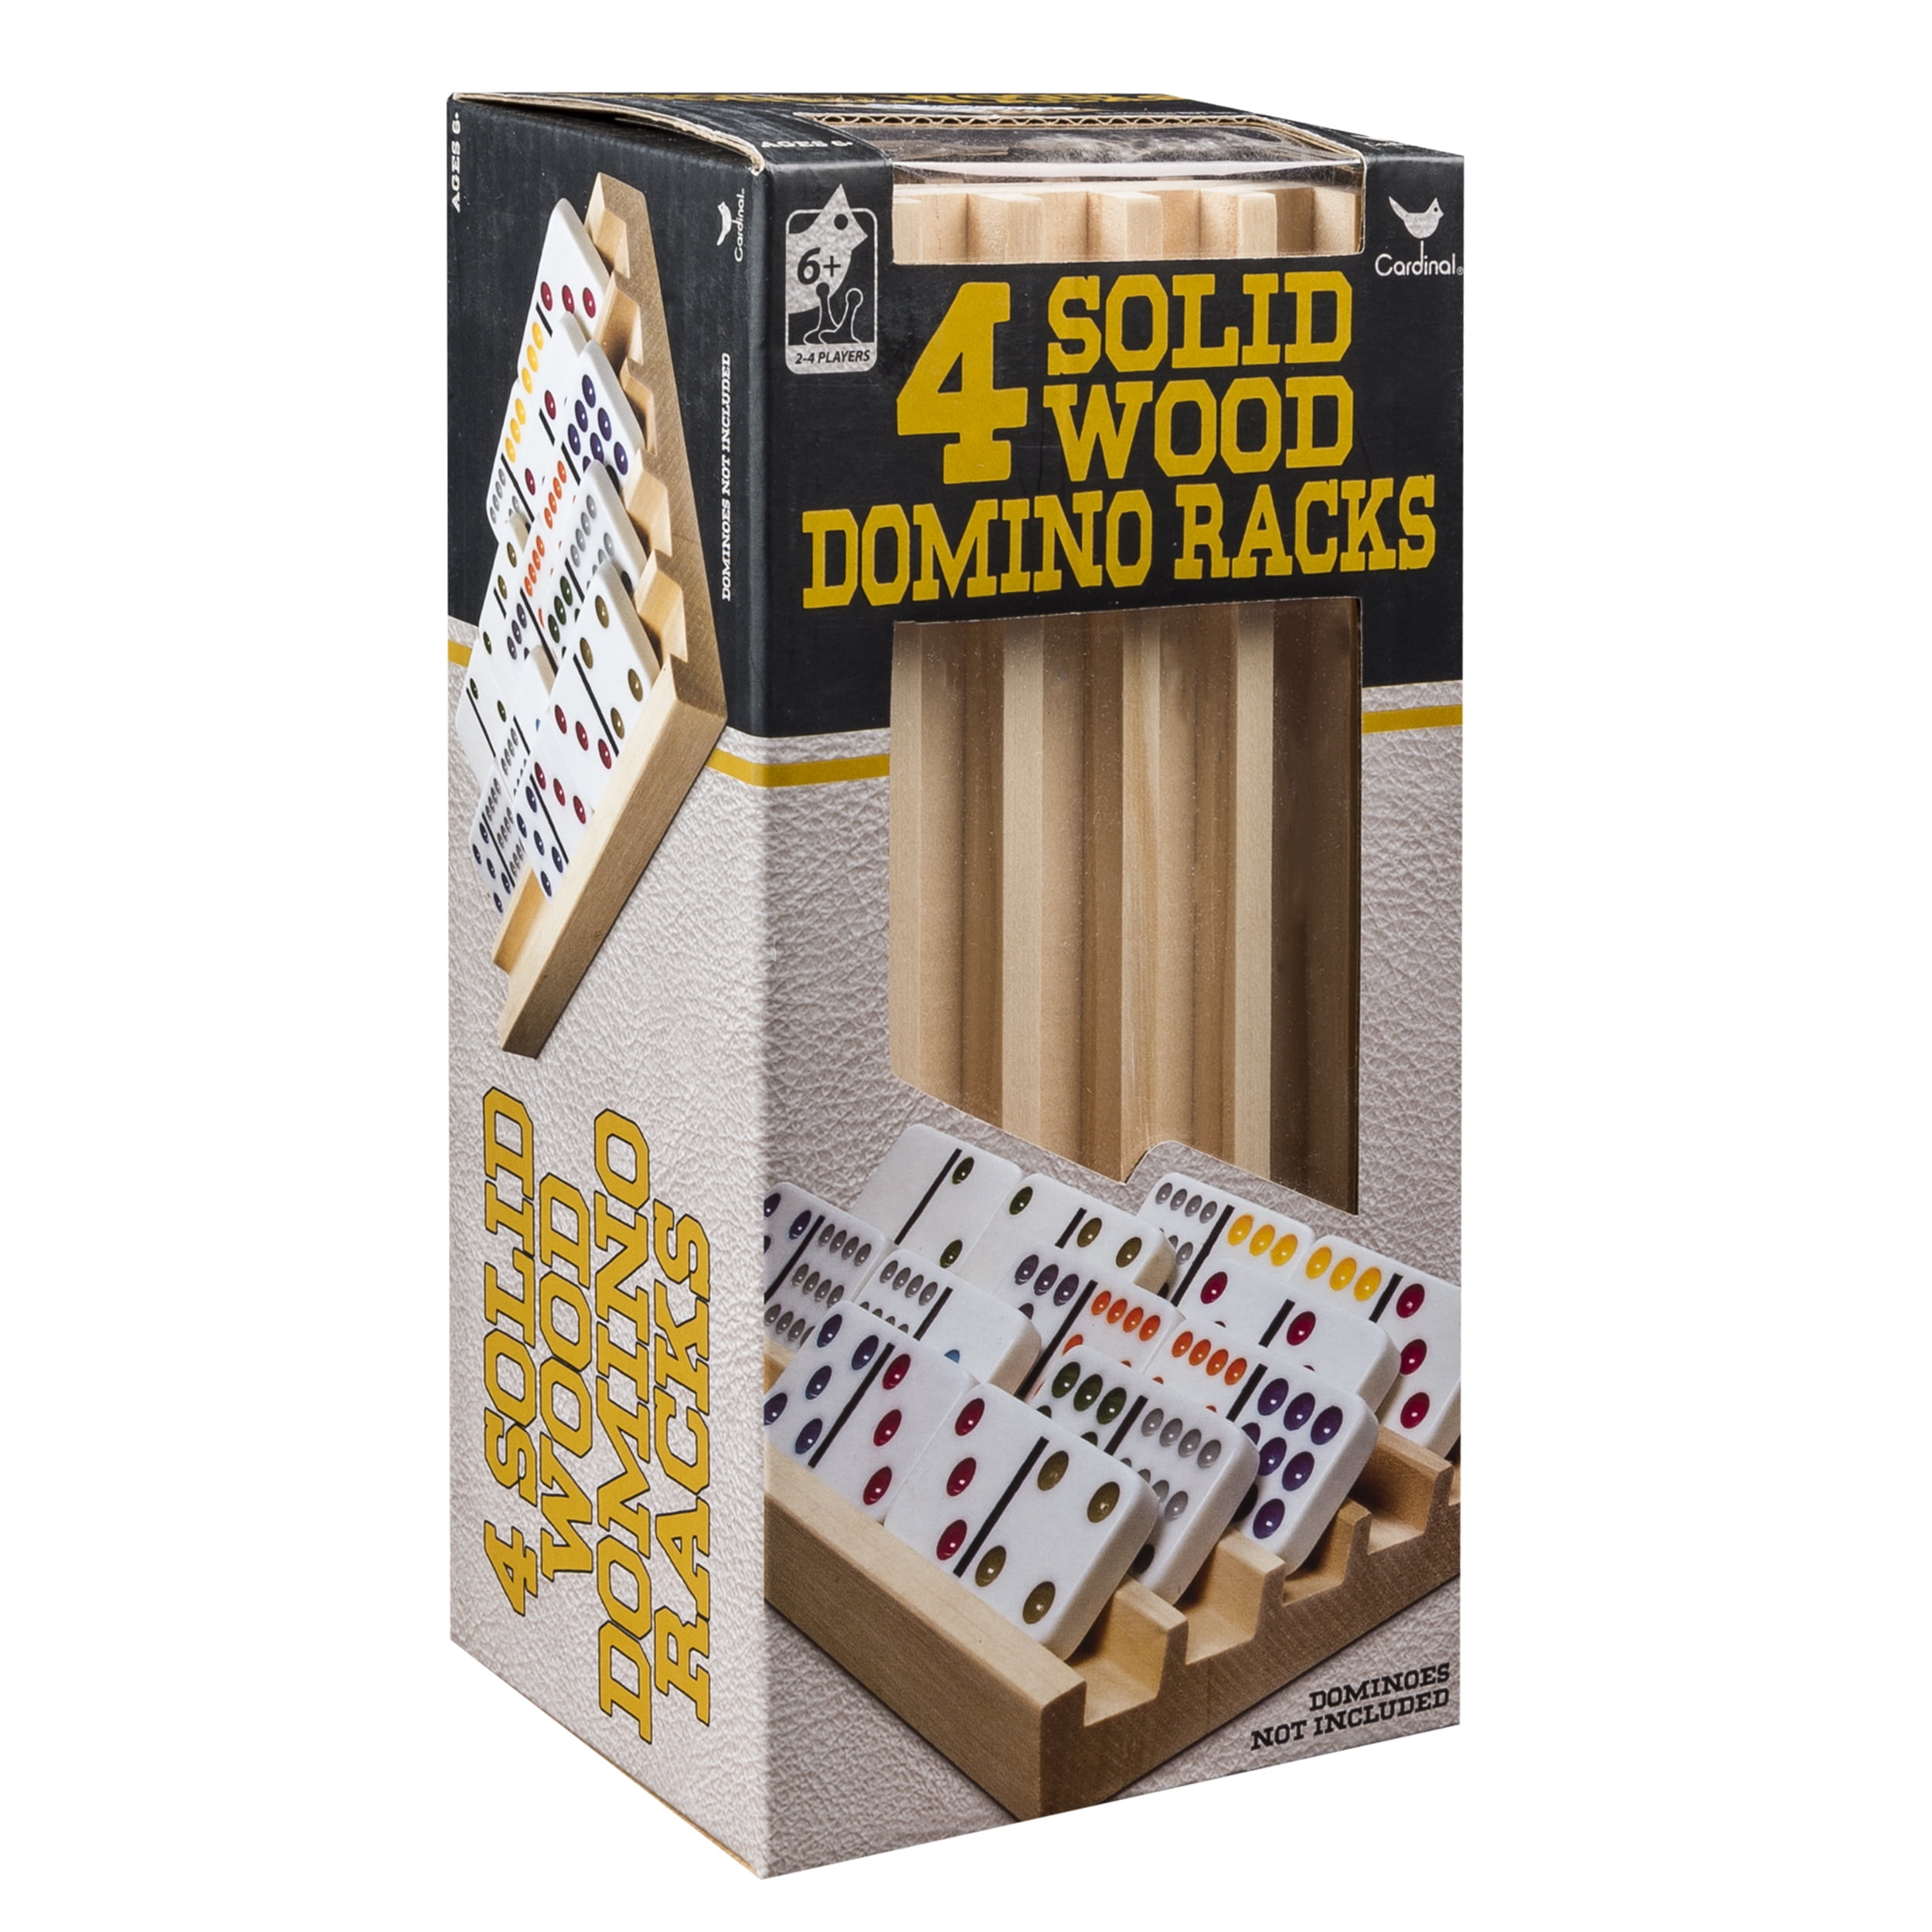 4 Solid Wood Domino Racks Cardinal Ages 6 for sale online